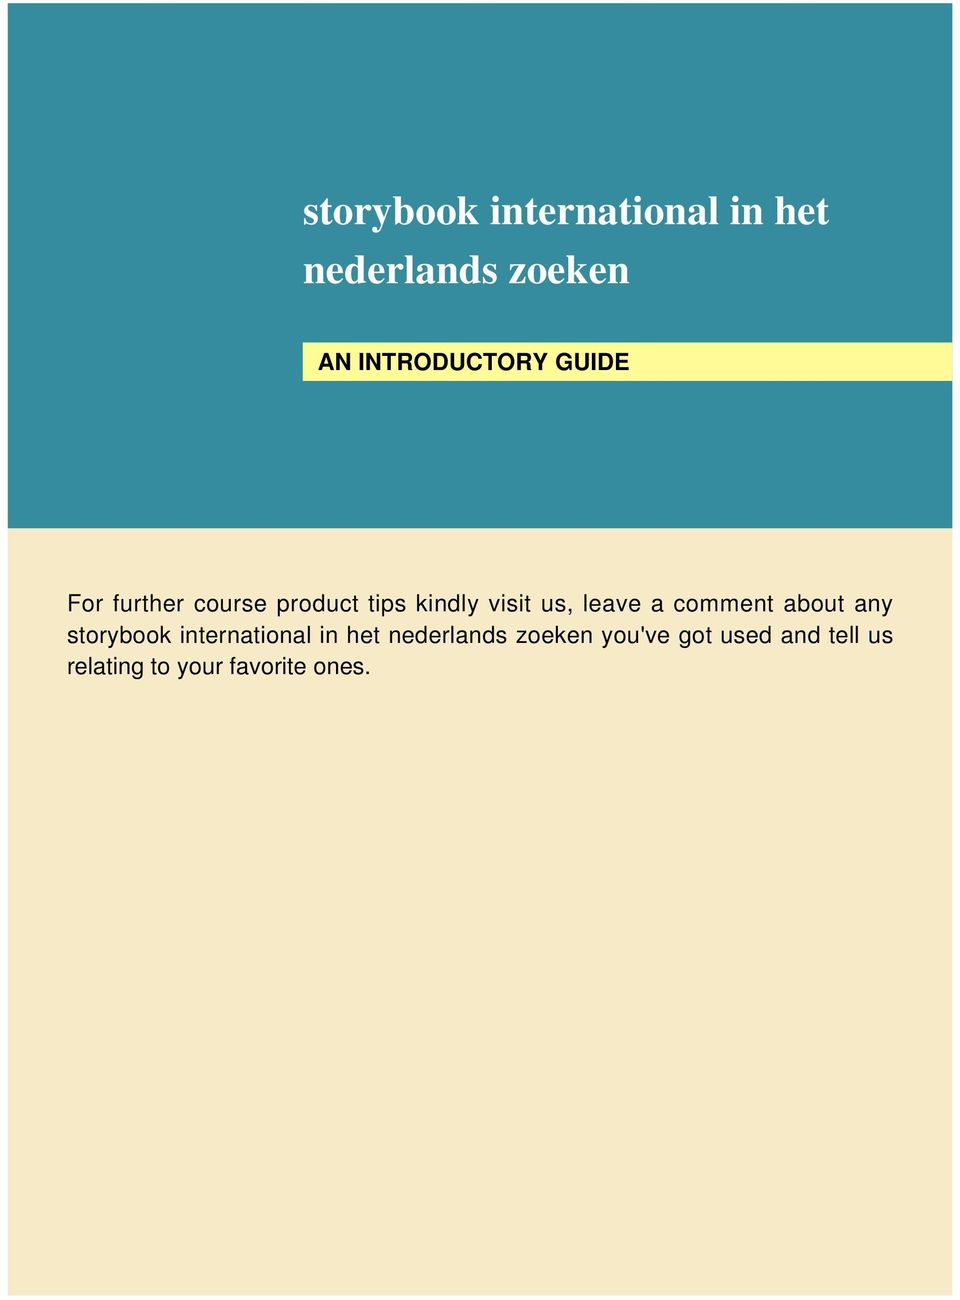 us, leave a comment about any storybook international in het